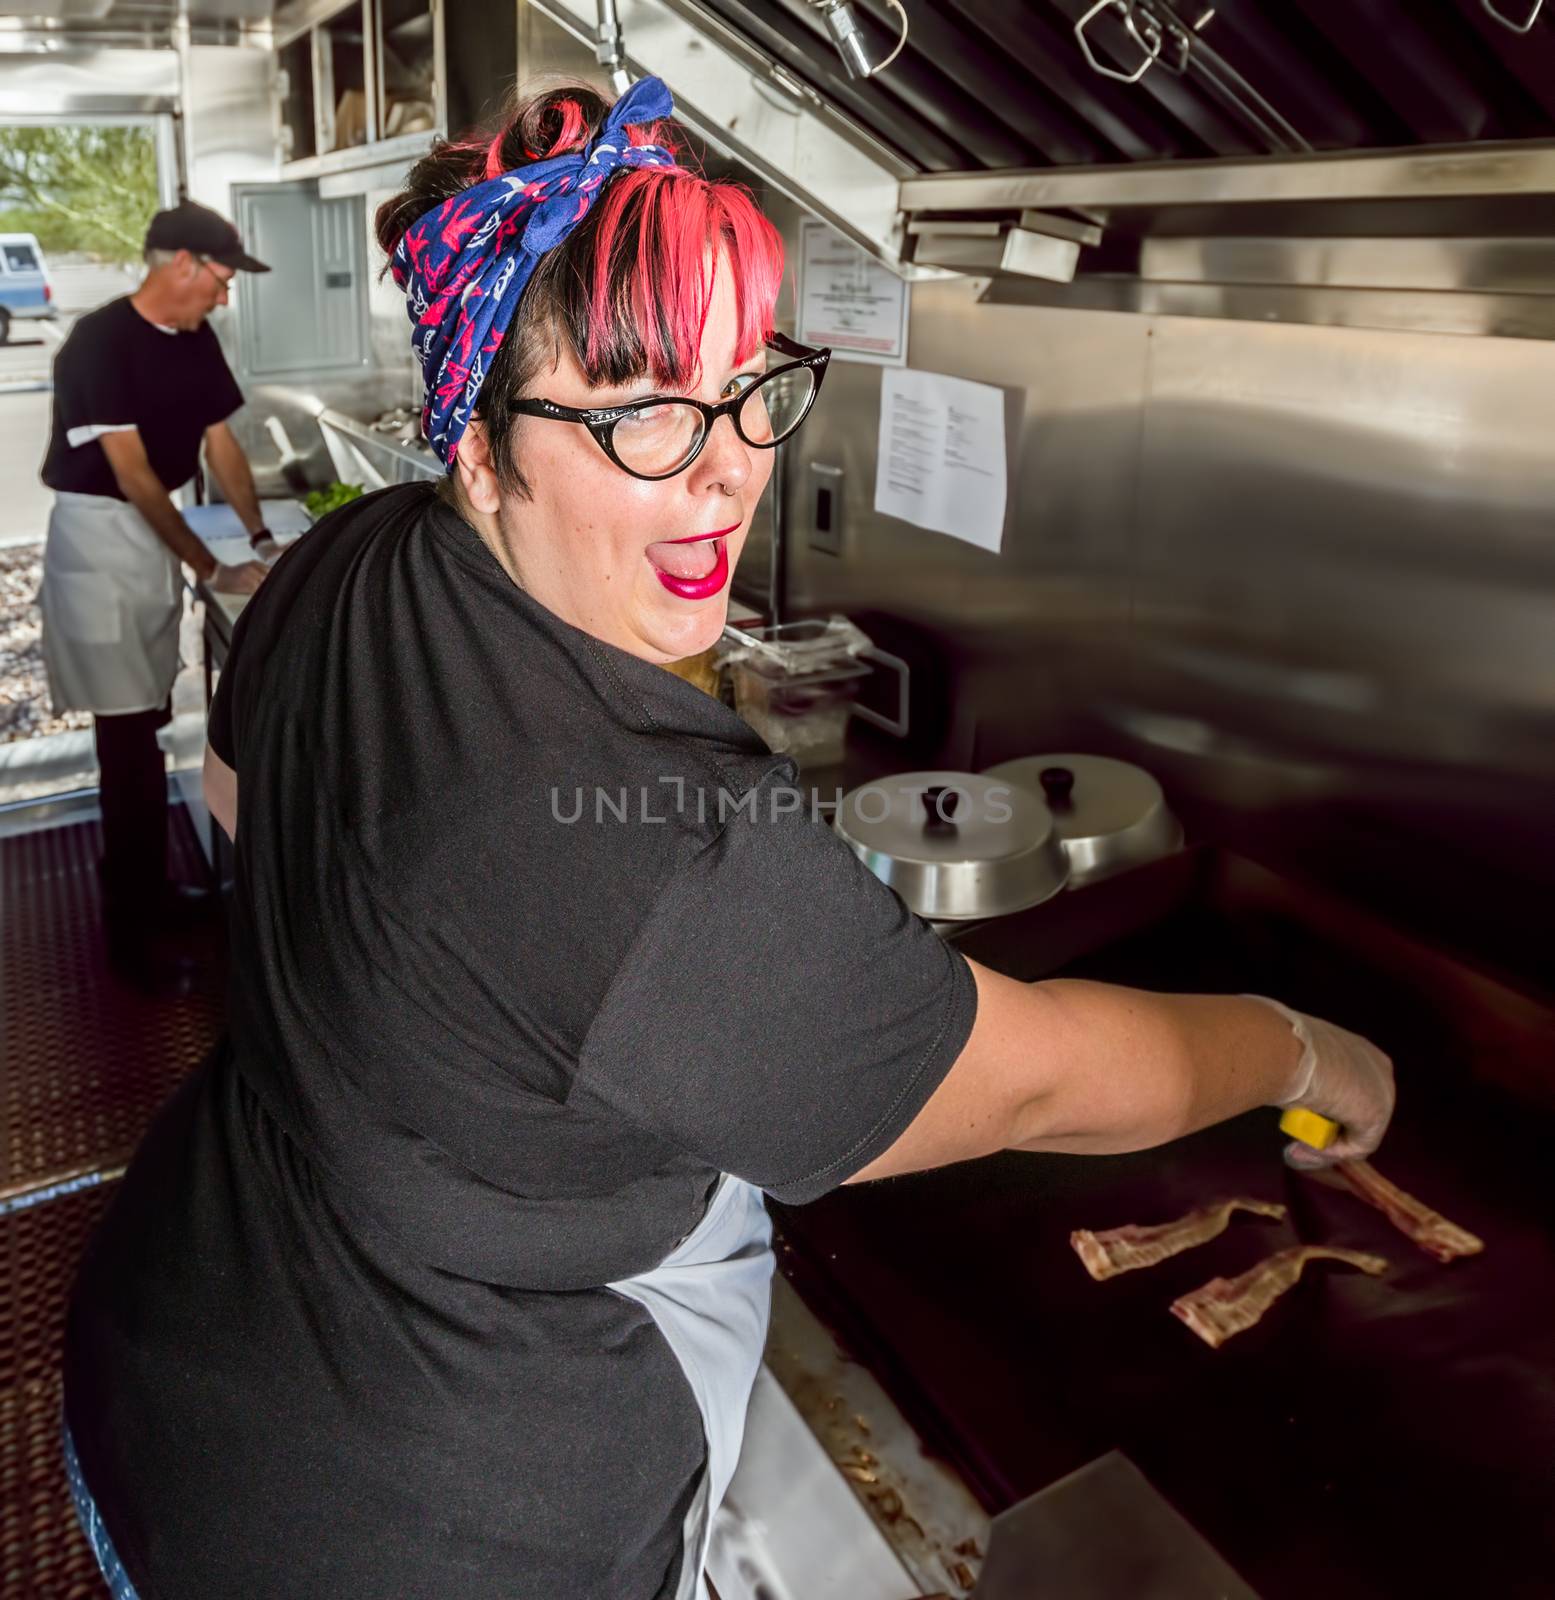 Upbeat Chef in Food Truck by Creatista